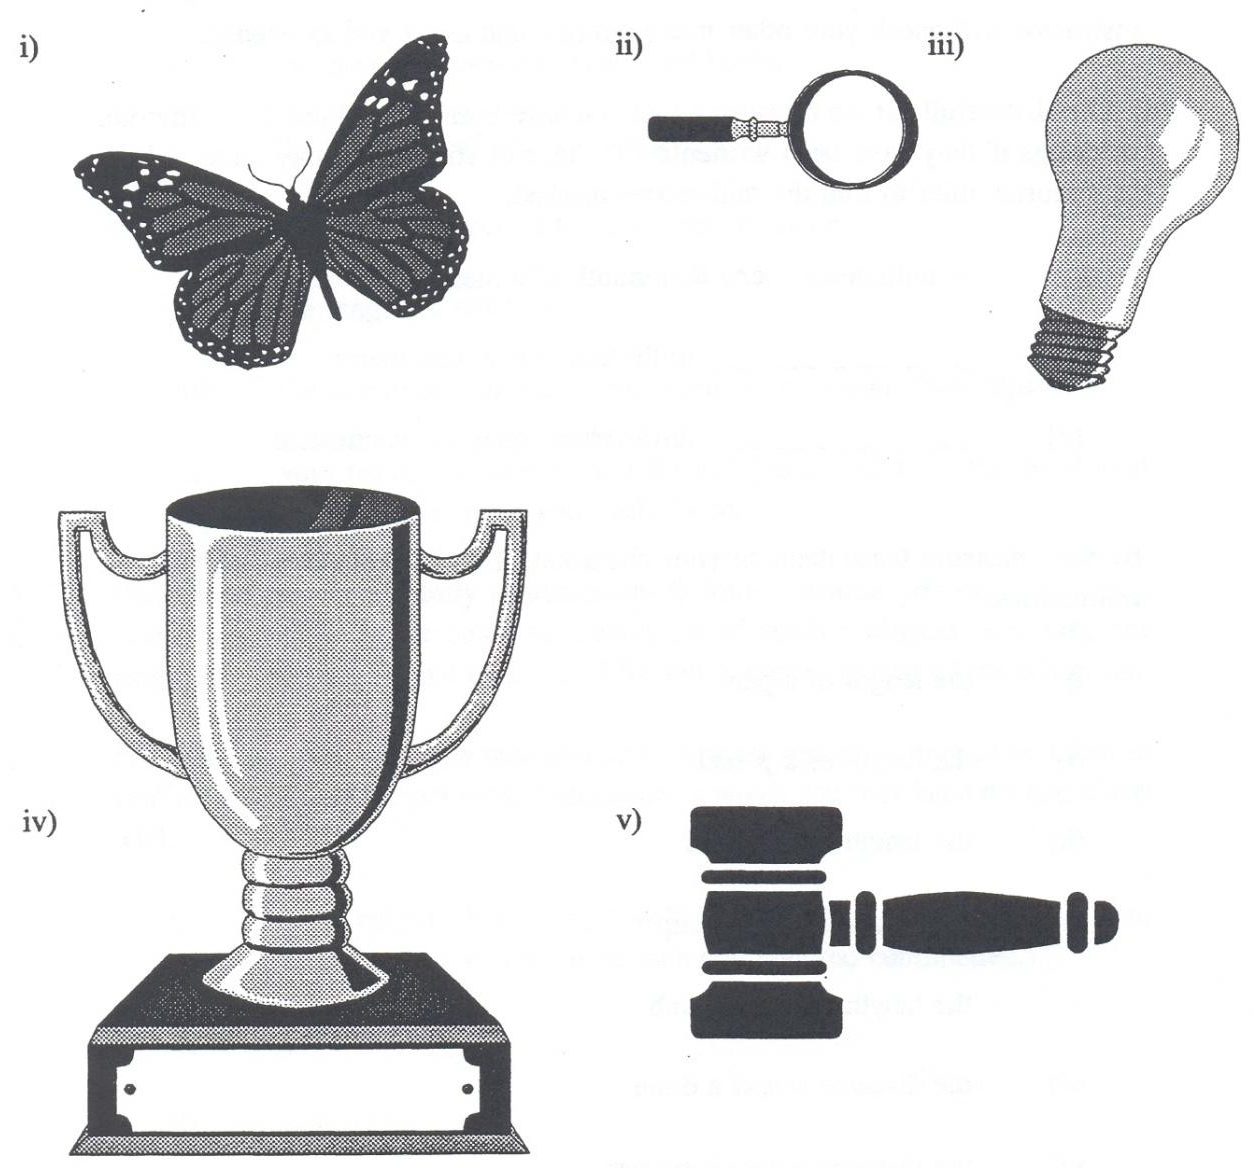 Pictures of a butterfly, magnifying glass, lightbulb, trophy, and hammer.